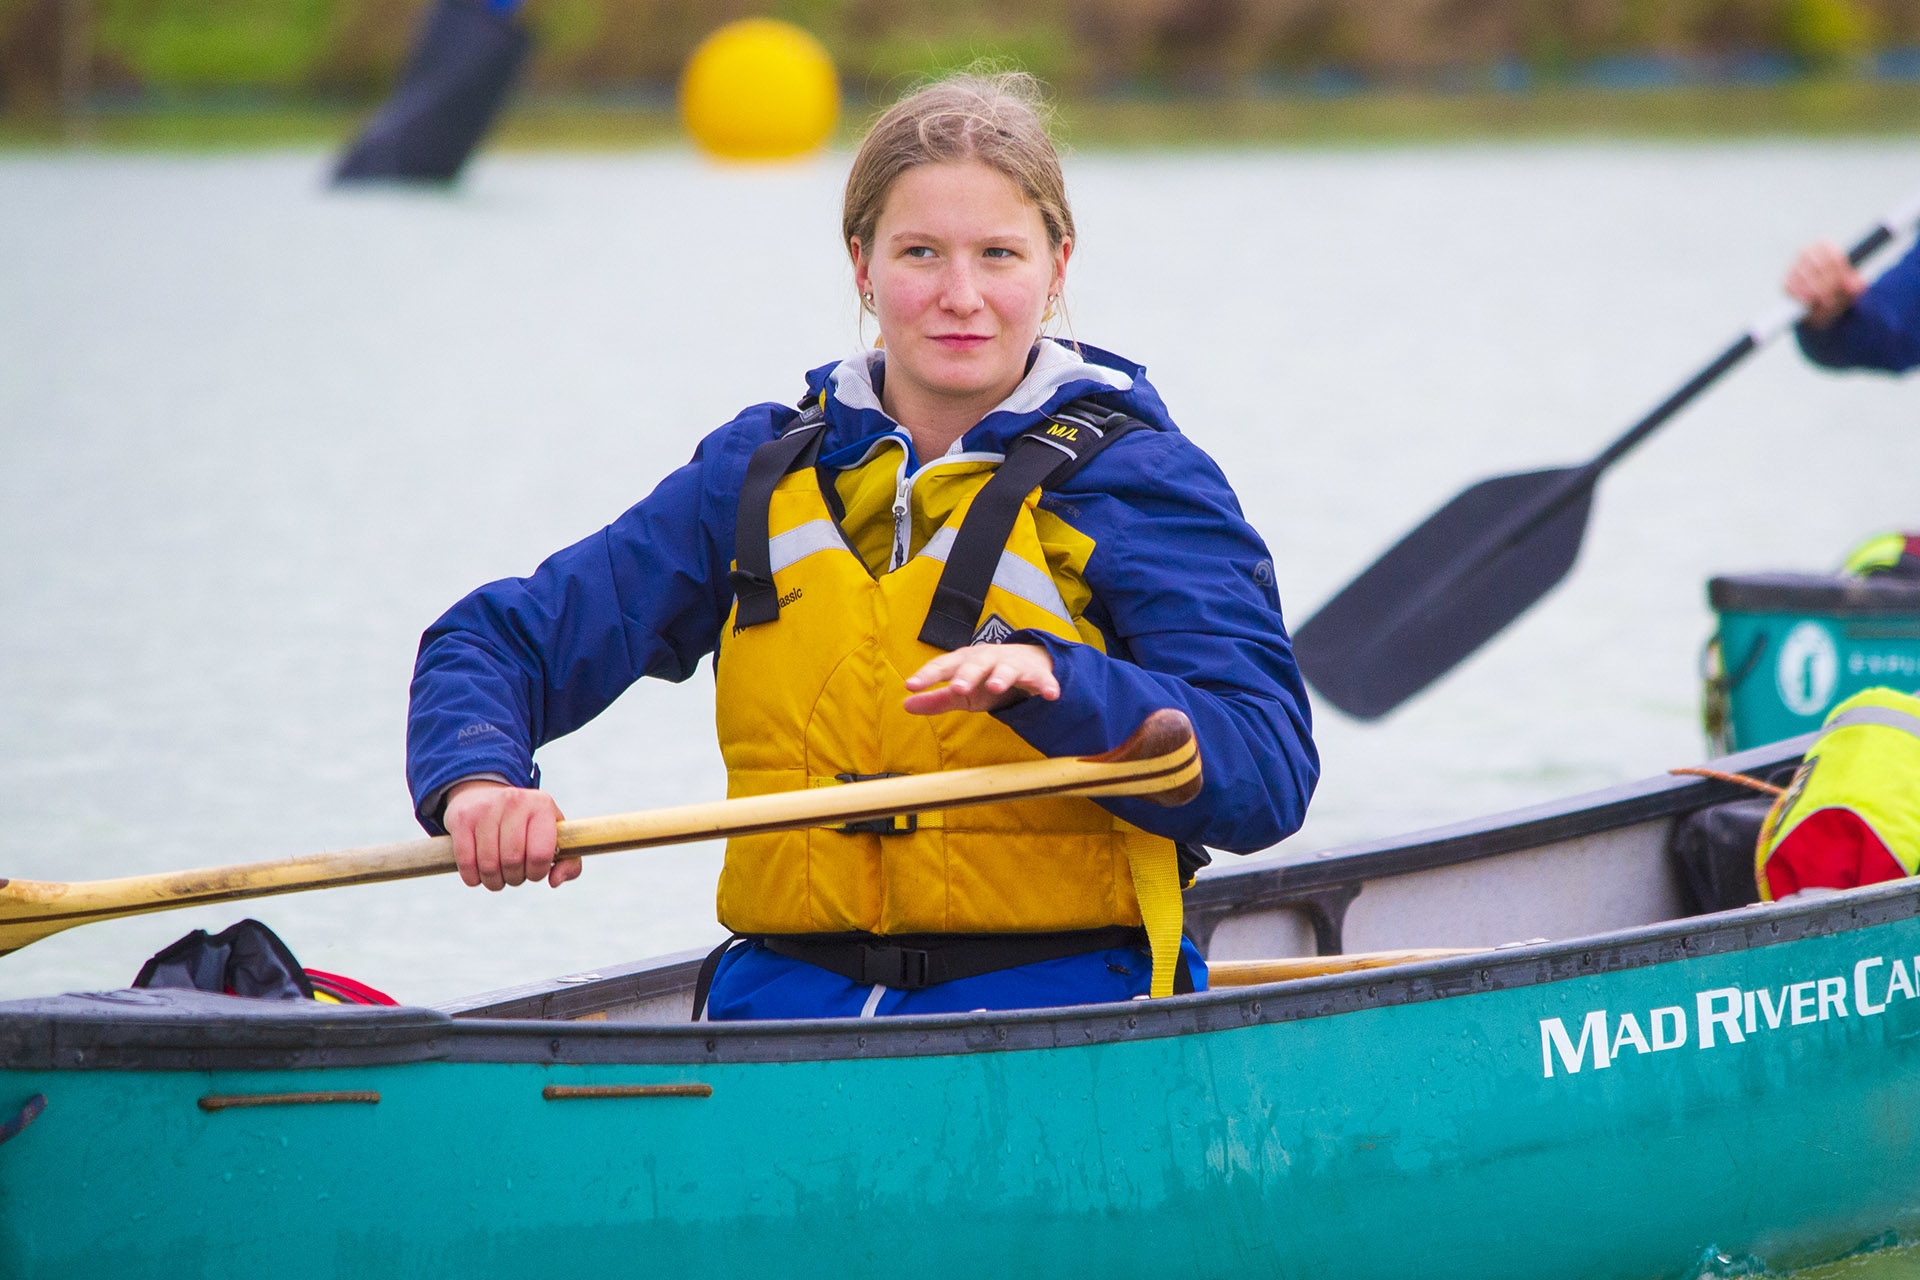 Outdoor Pursuits. Student paddling a canoe